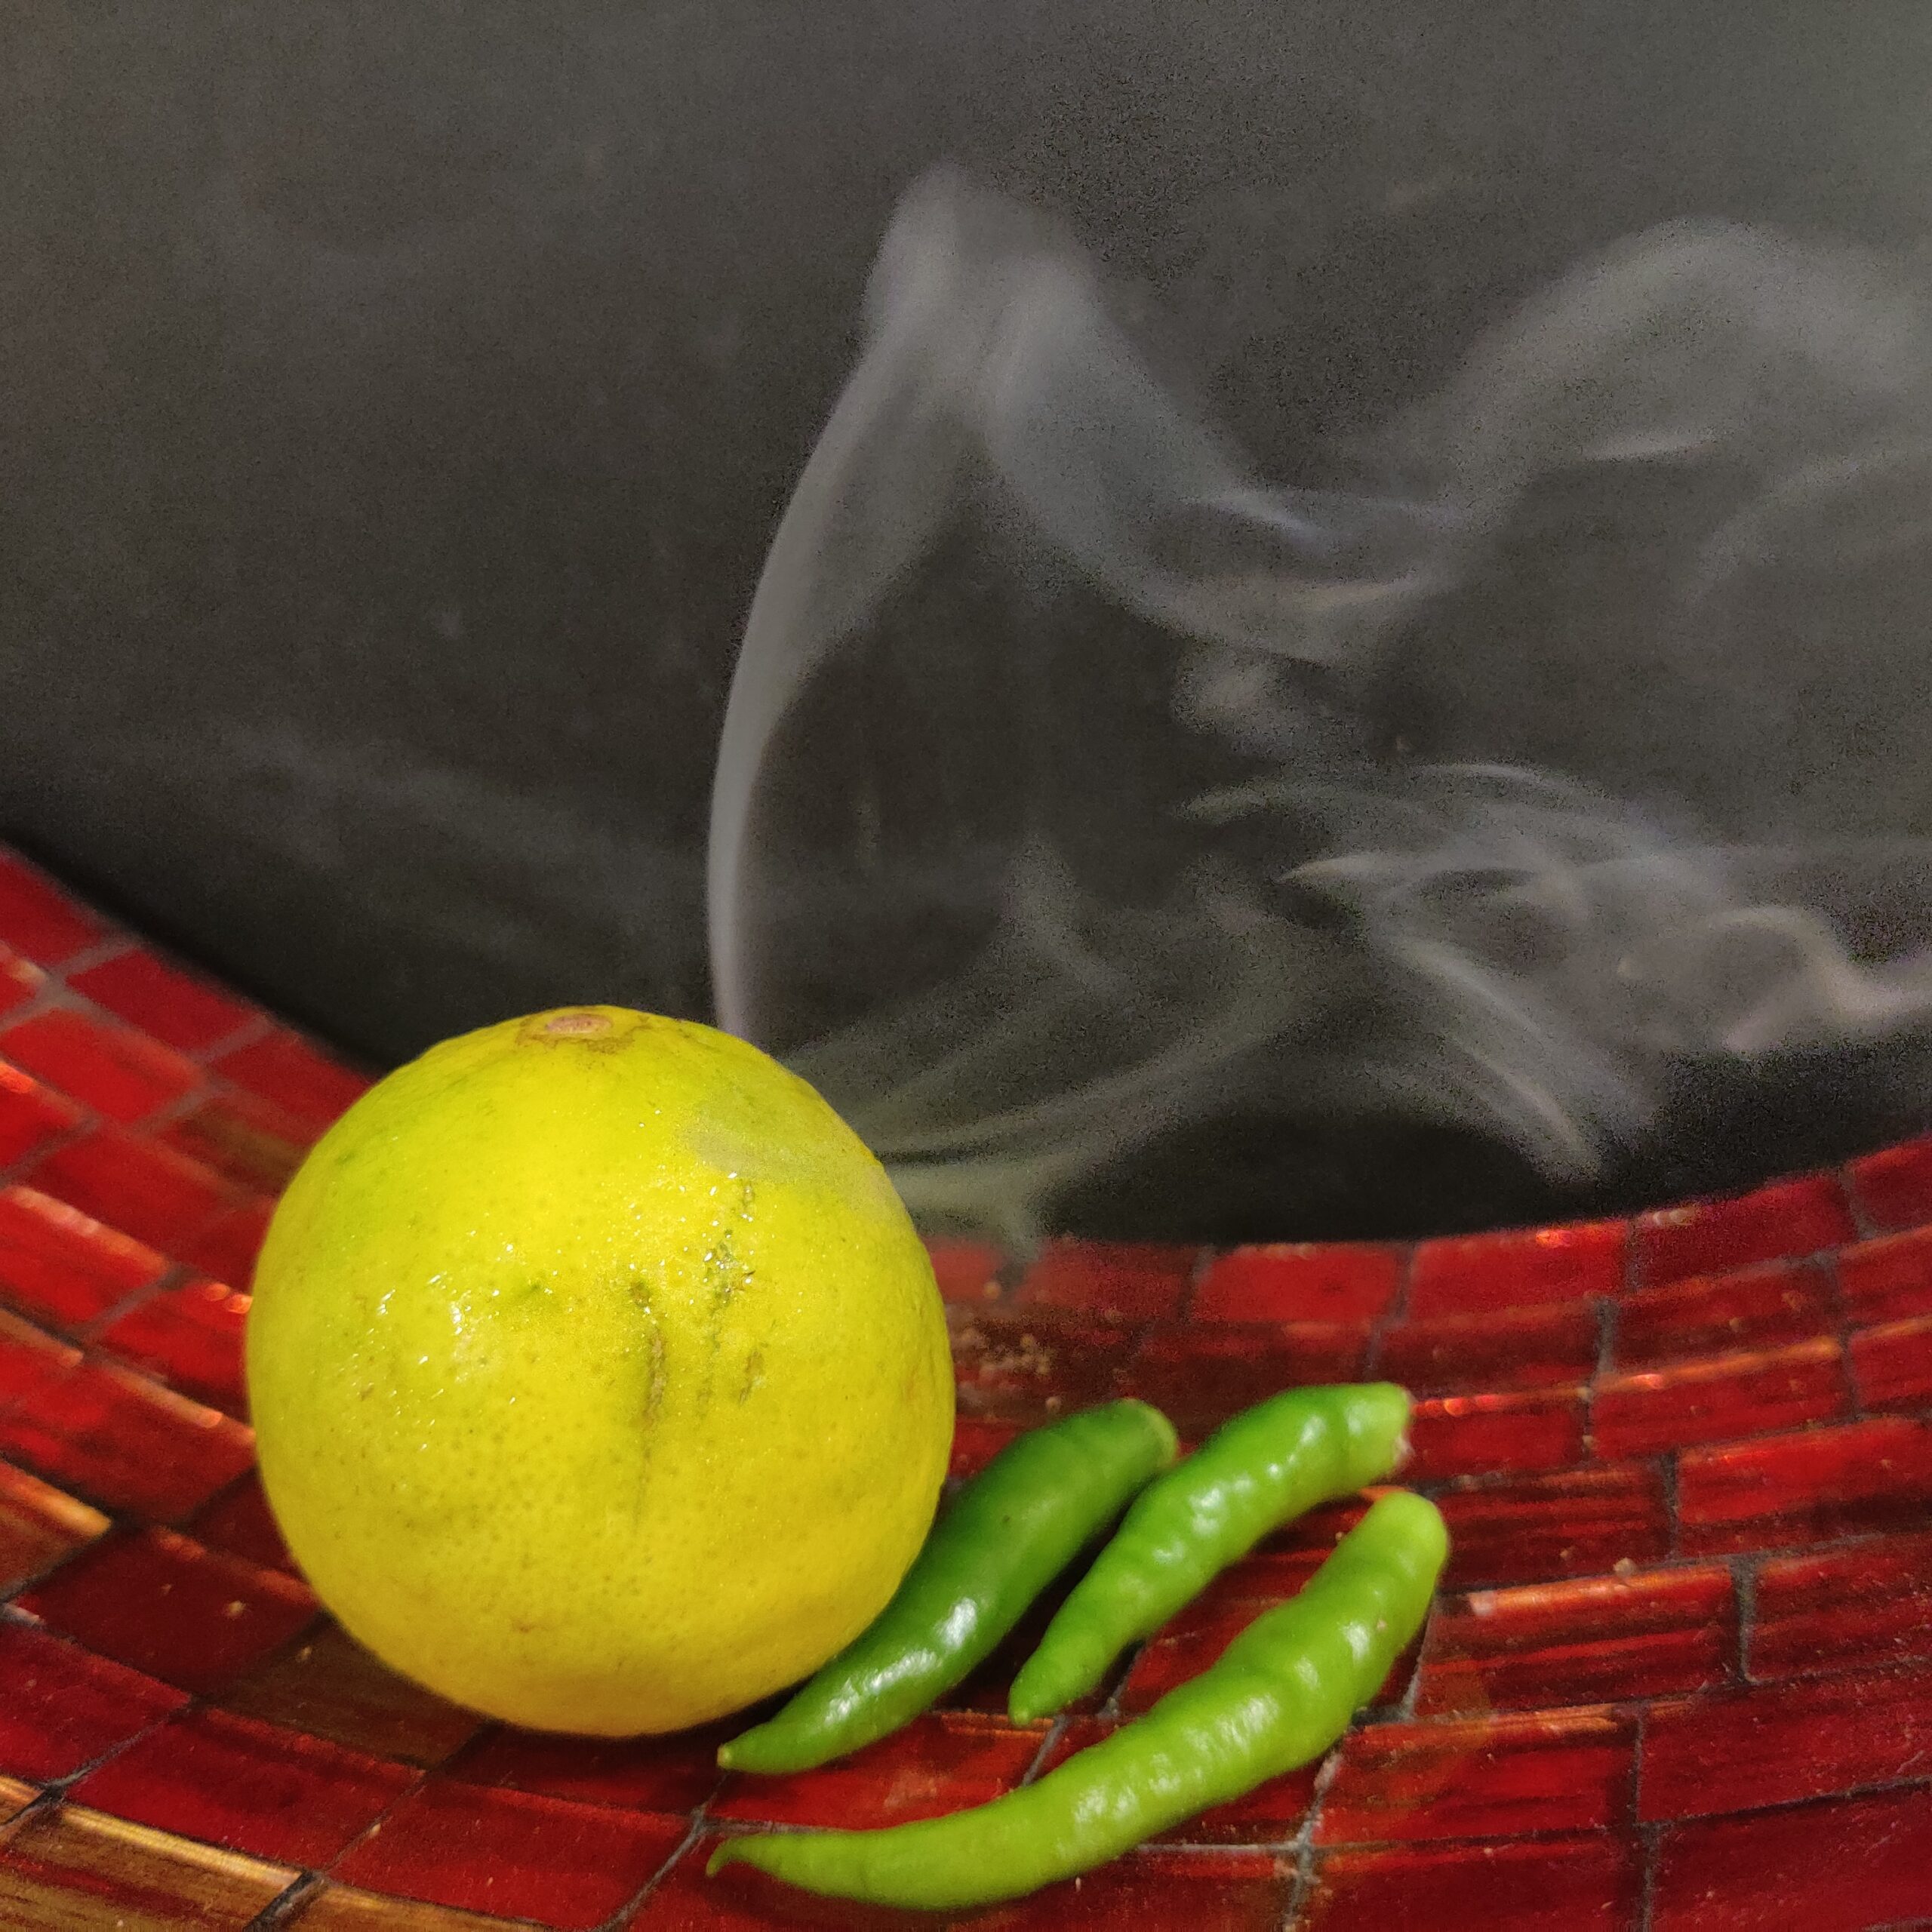 Of Lemons and Chillies